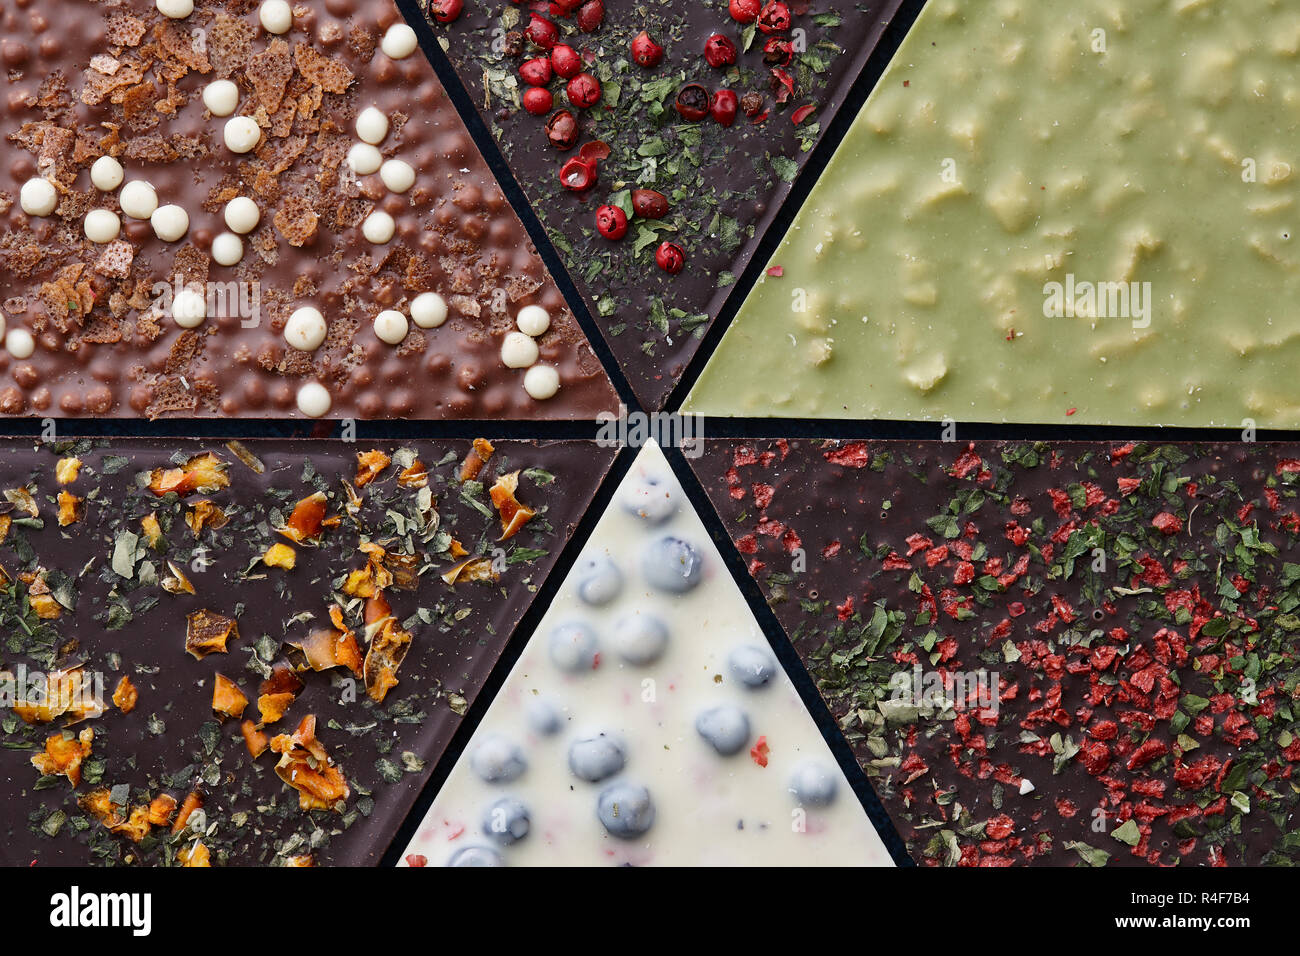 Triangle shaped pieces of handmade chocolate with diverse kinds of toppings, close up view Stock Photo